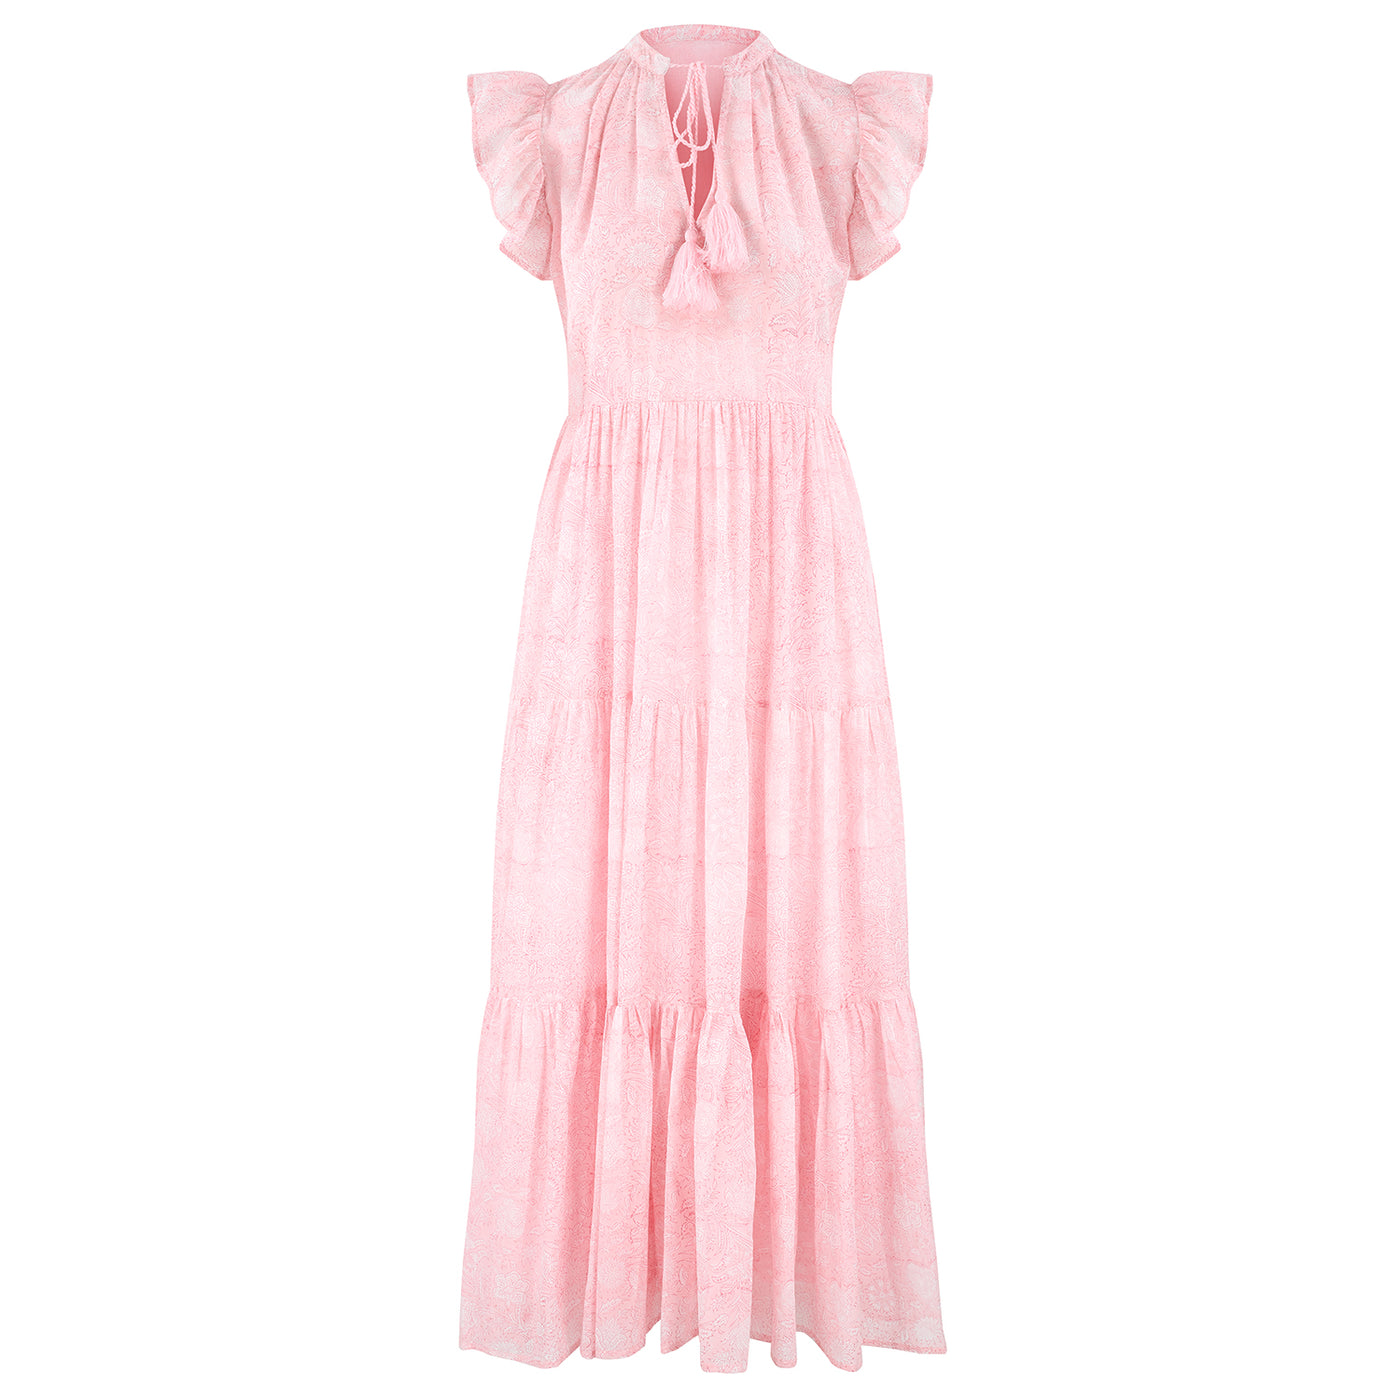 Penny sleeveless dress in pink